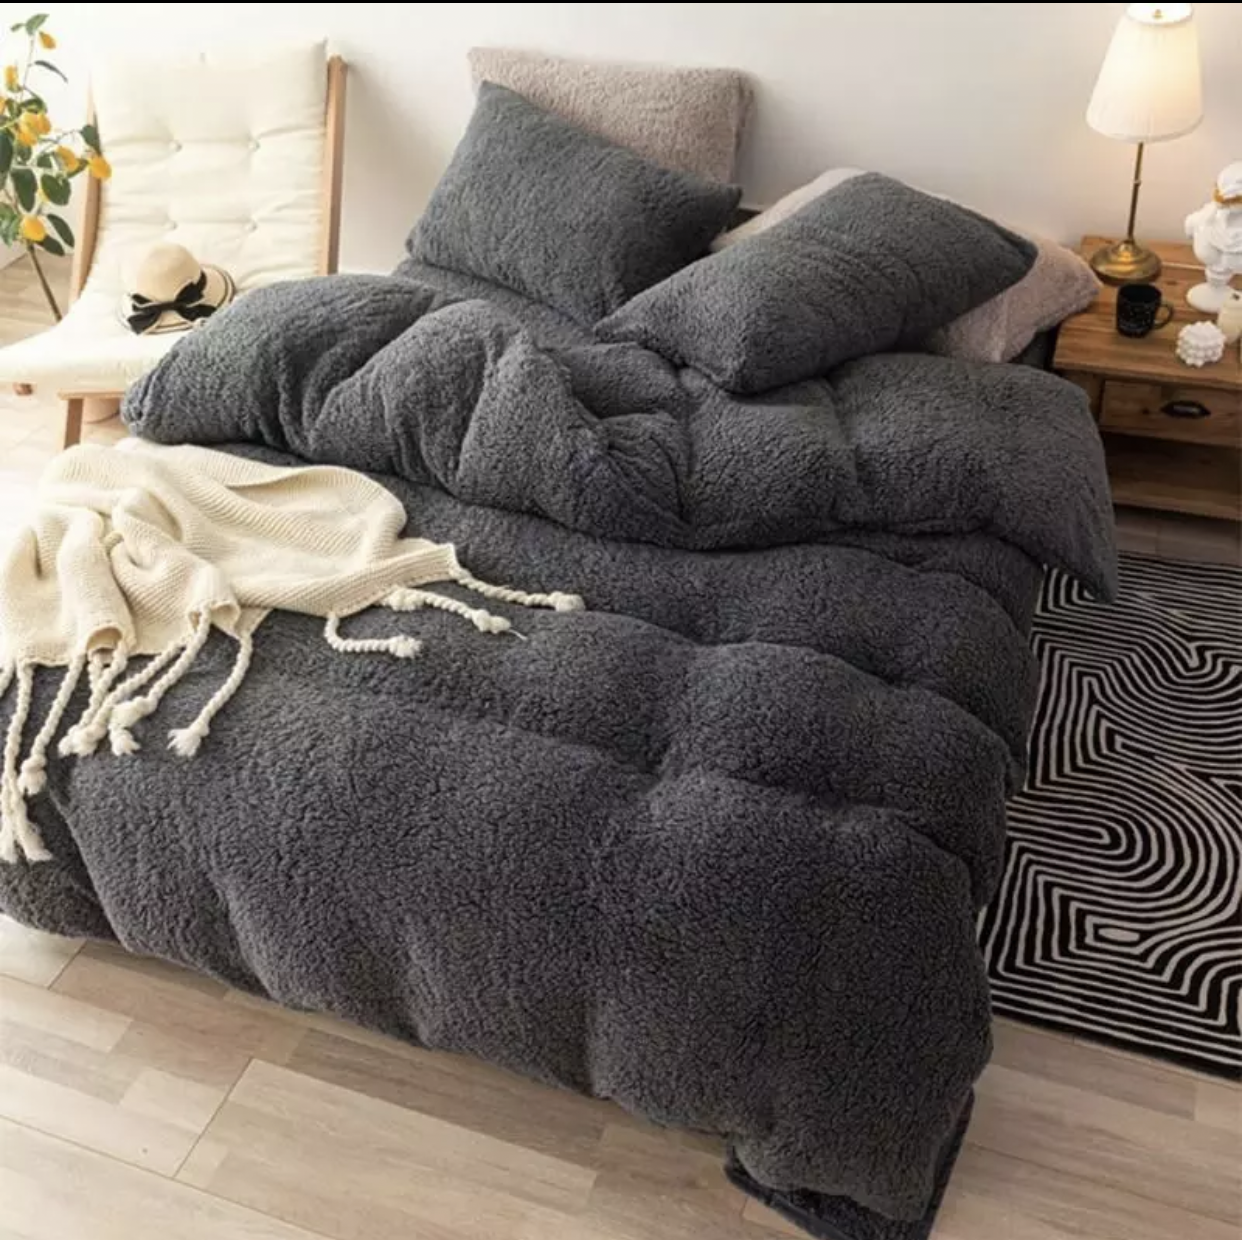 Teddy Bear Fleece Fitted Sheet OR Duvet Cover Set Sherpa Thermal Warm Bedding Grey